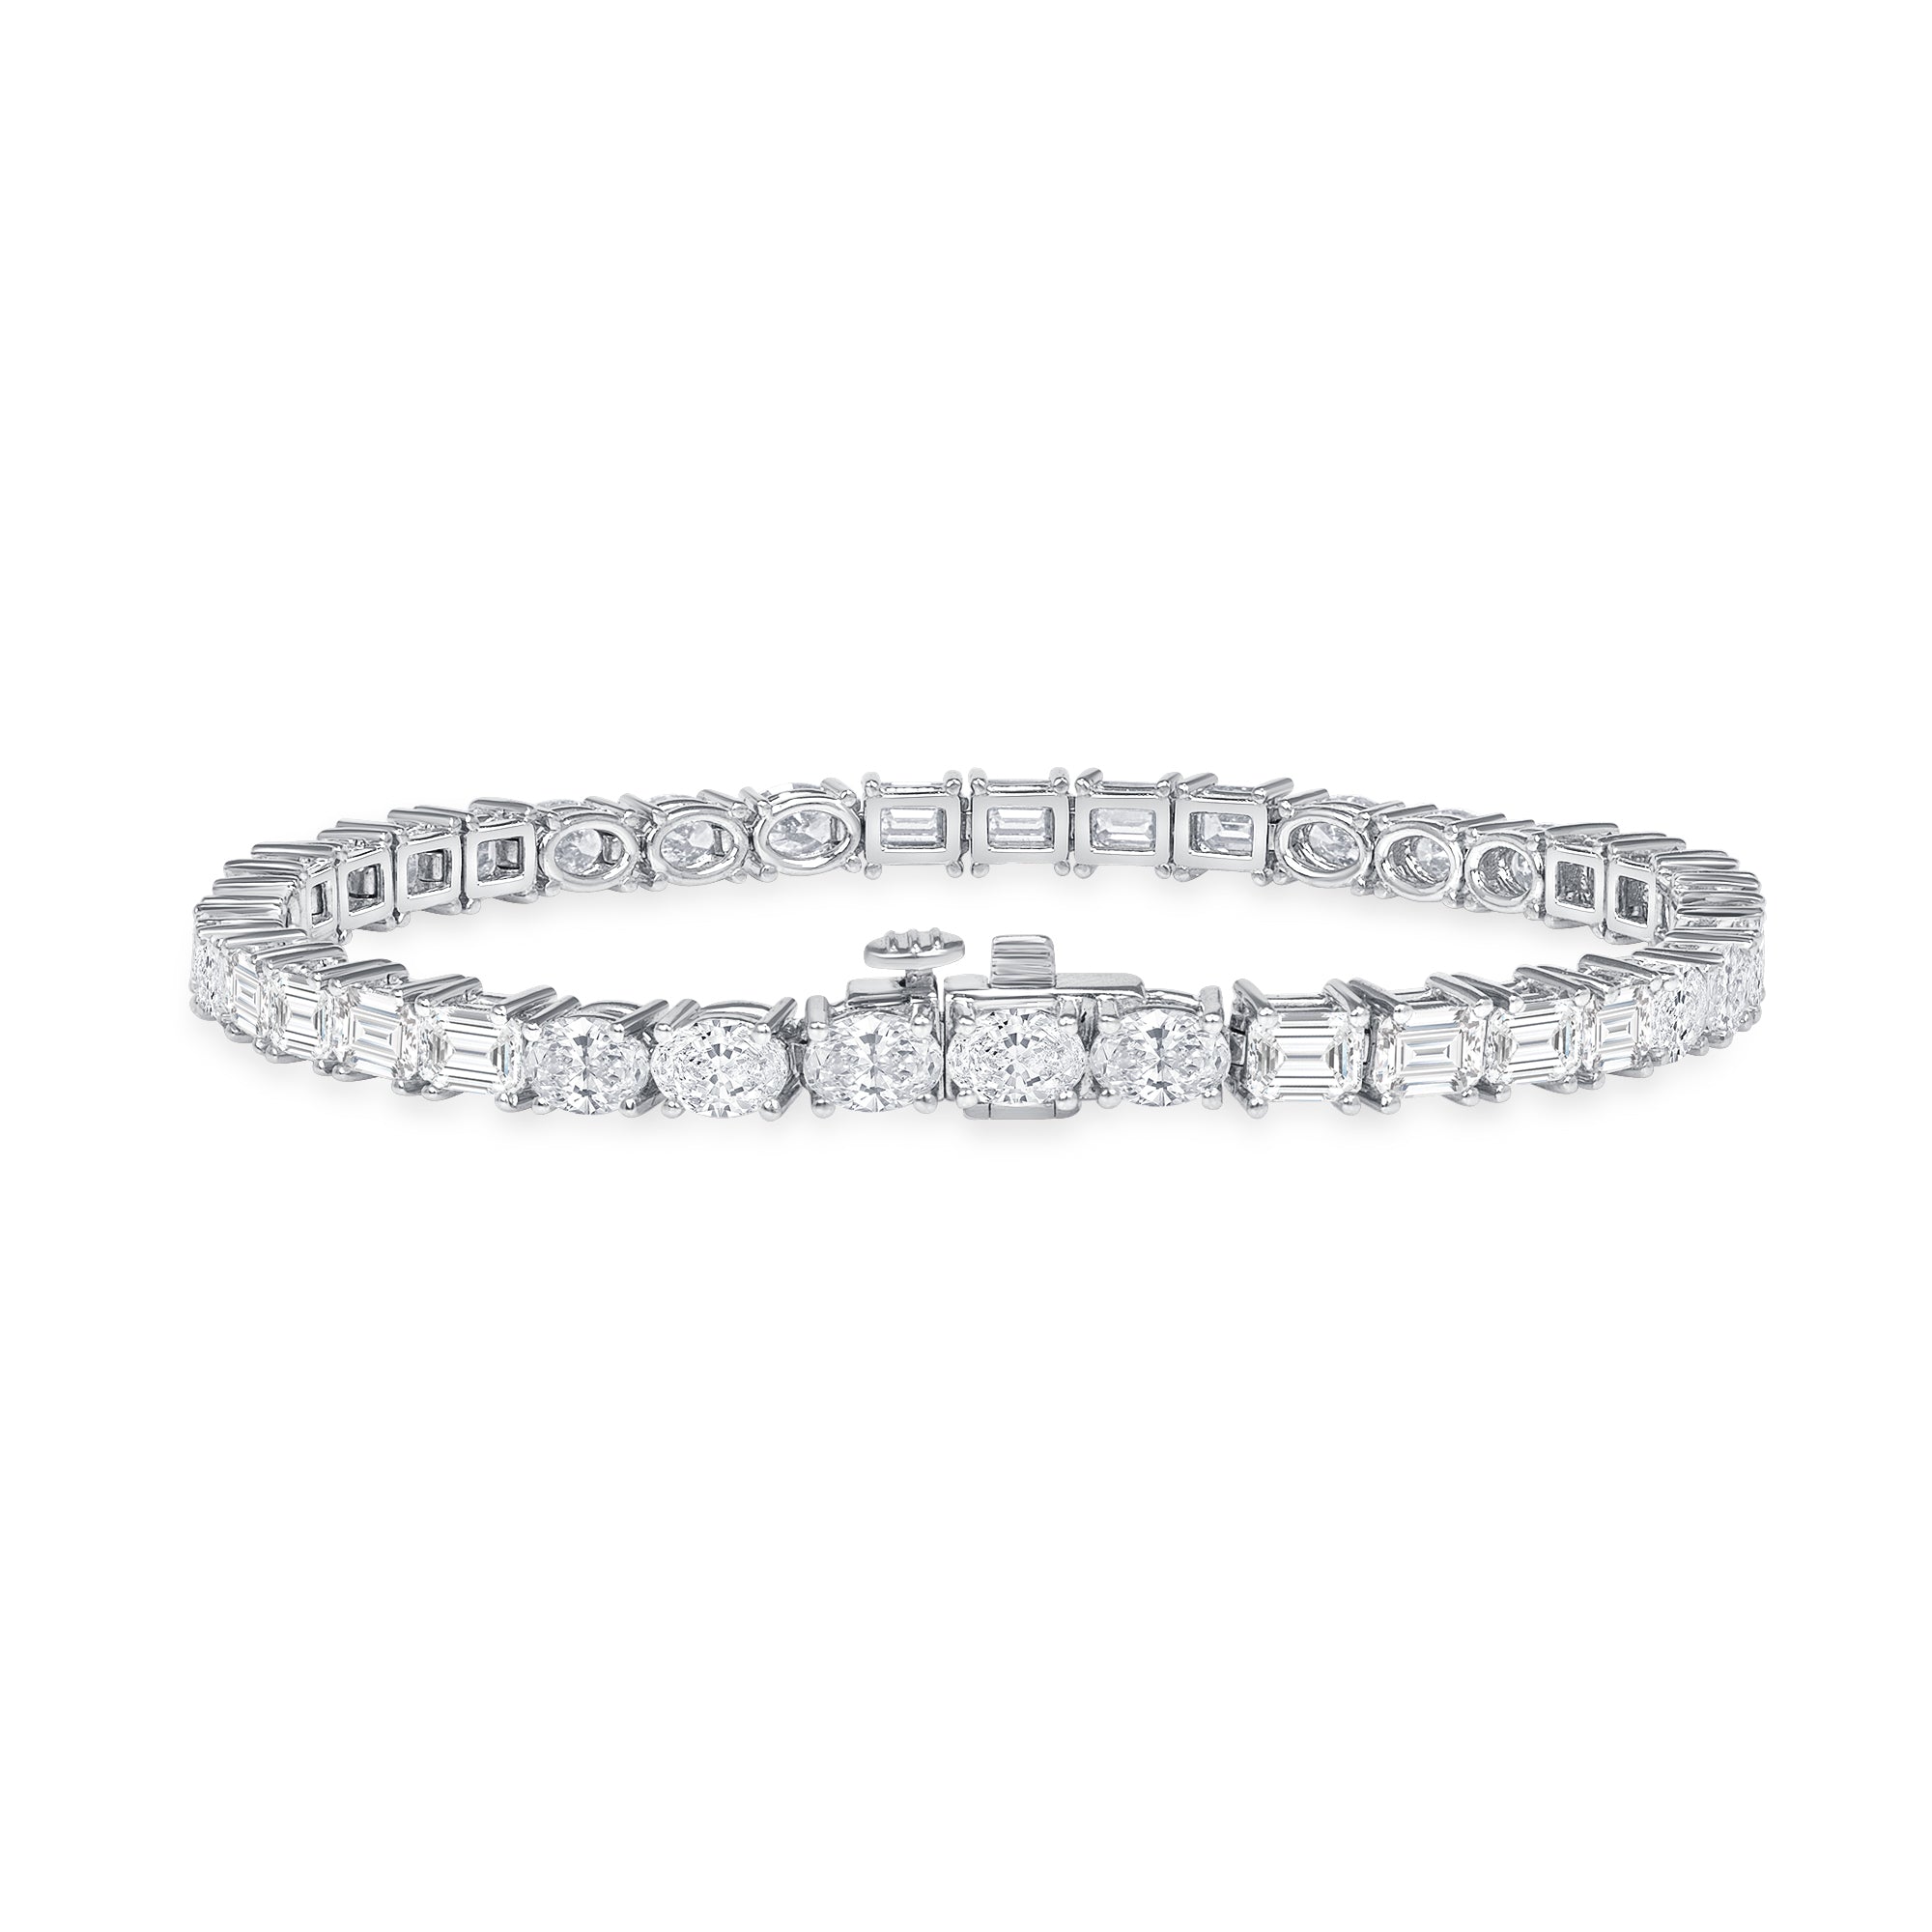 9.61ctw East-West Emerald Cut and Oval Cut Diamond Tennis Bracelet in 18K White Gold